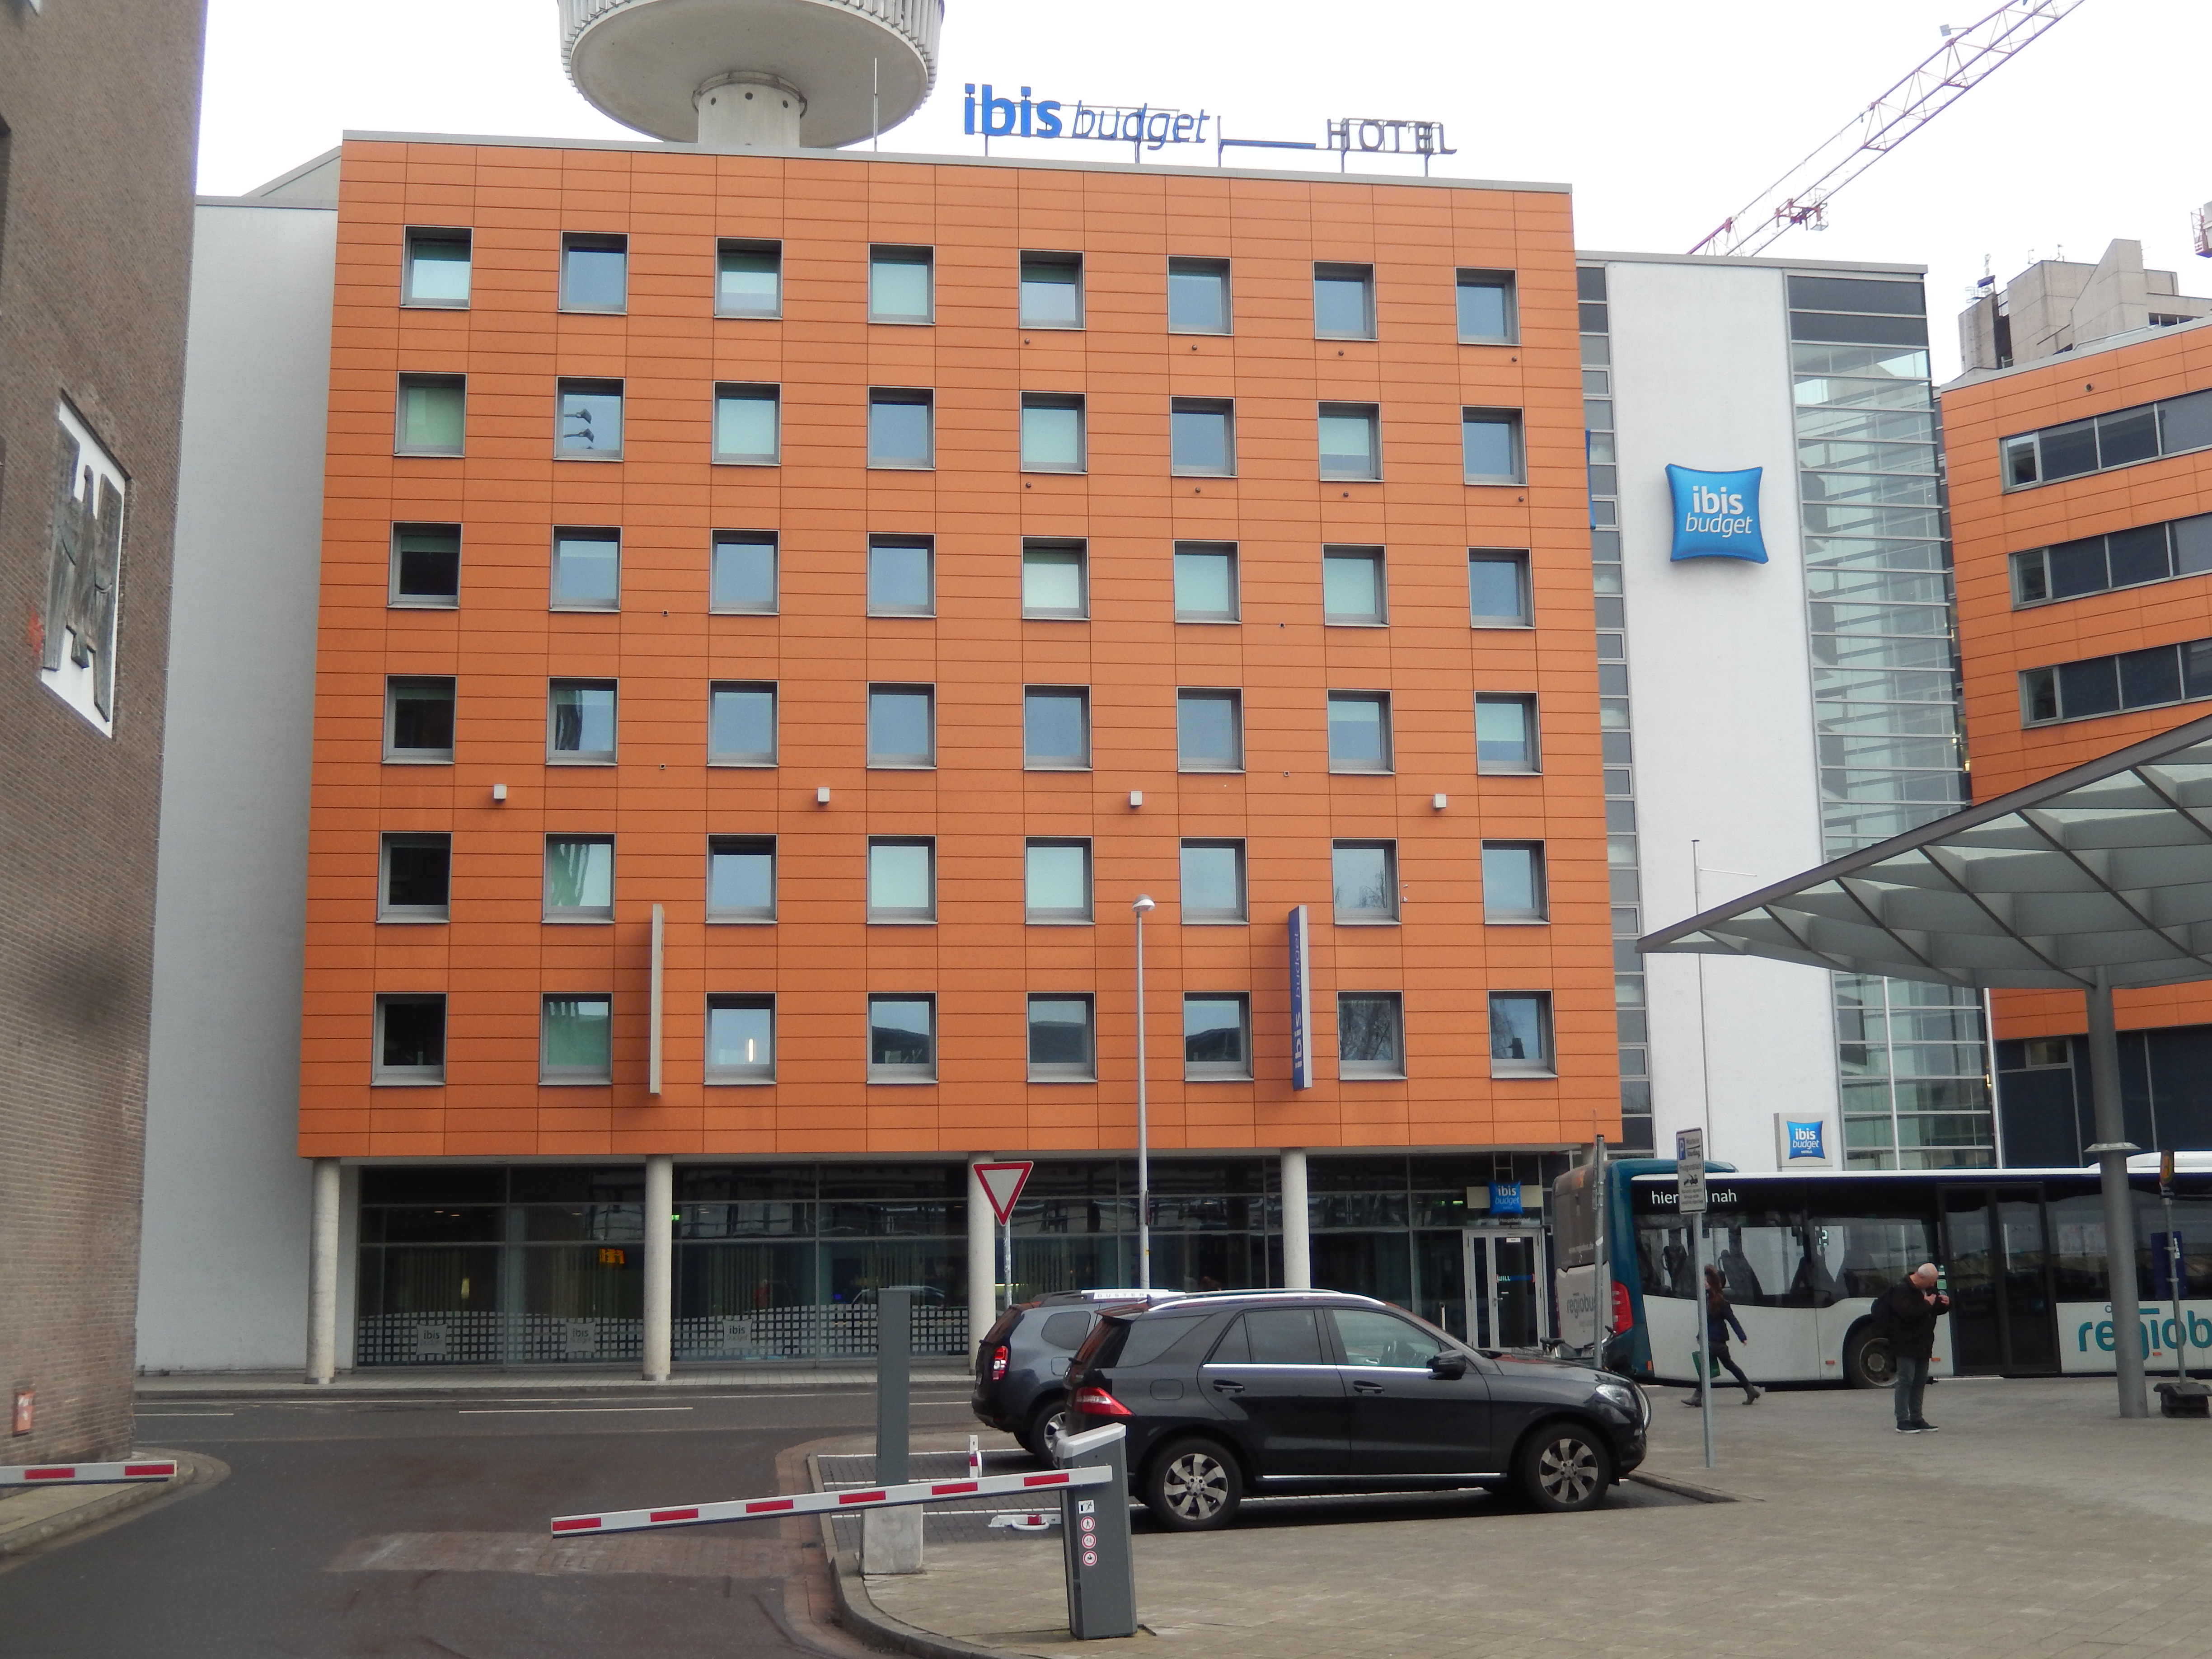 File Ibis Budget Hotel Hannover Jpg Wikimedia Commons